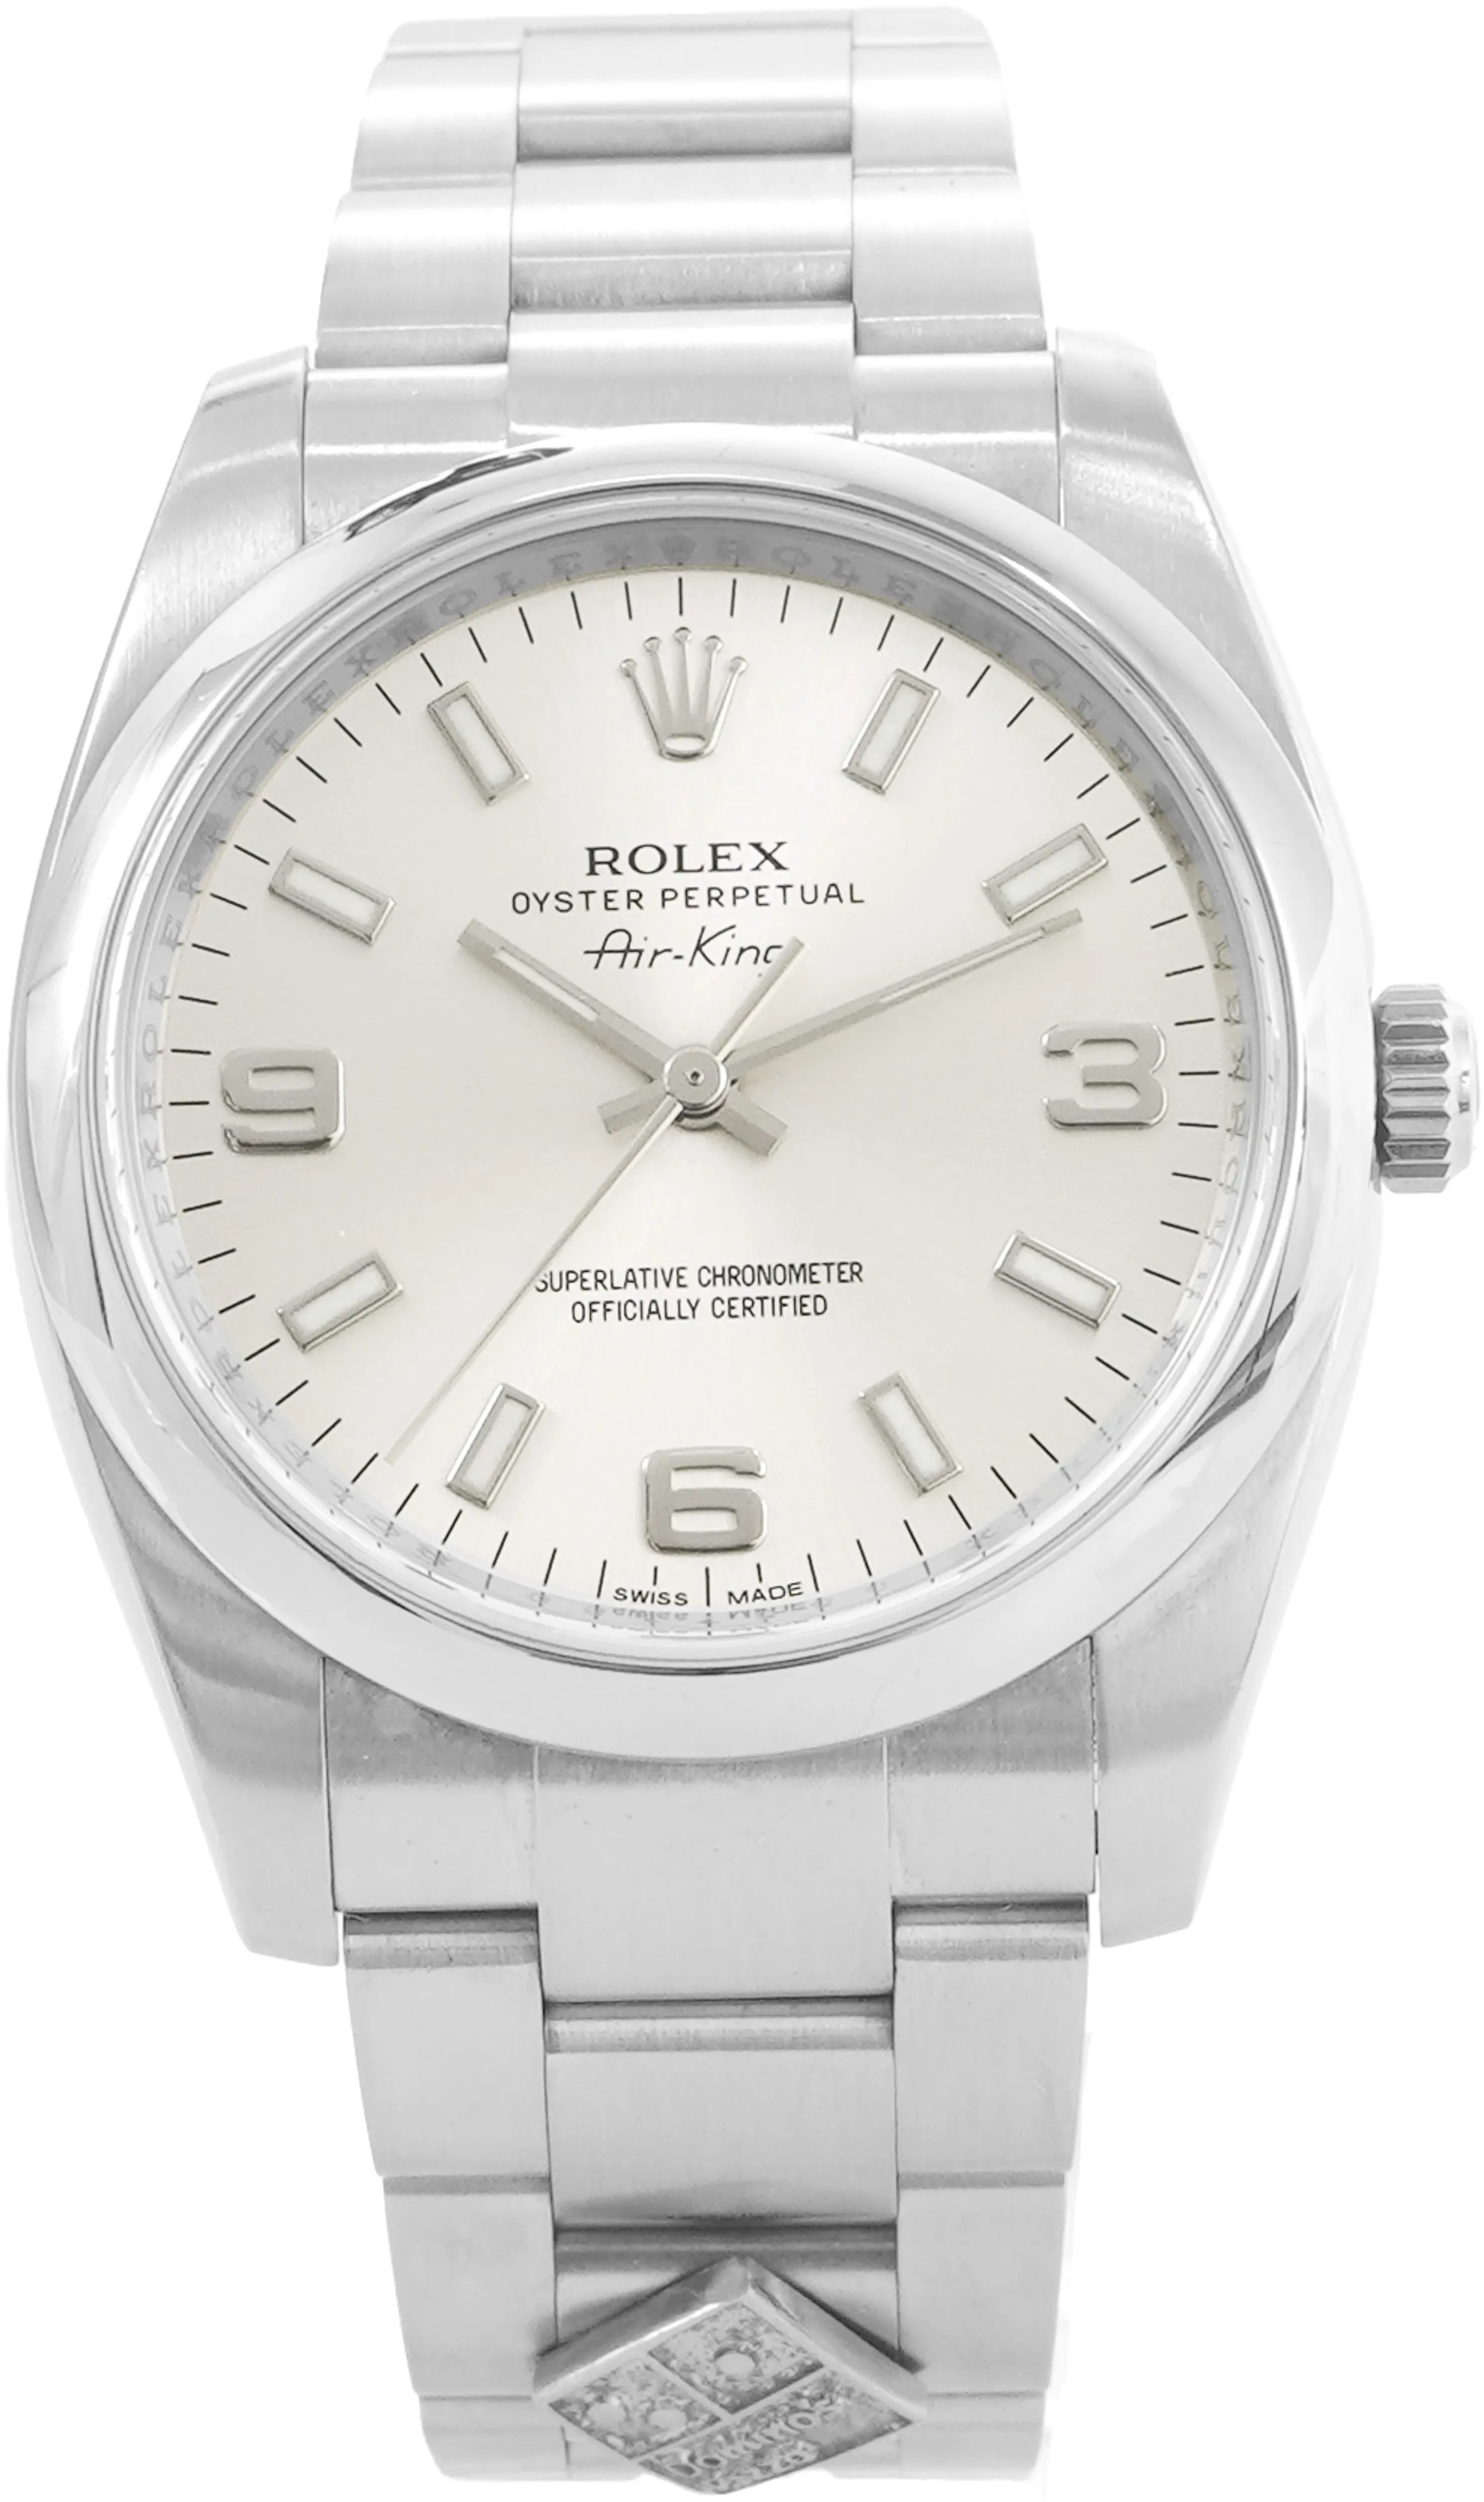 Rolex Oyster Perpetual 114200 34mm Stainless steel